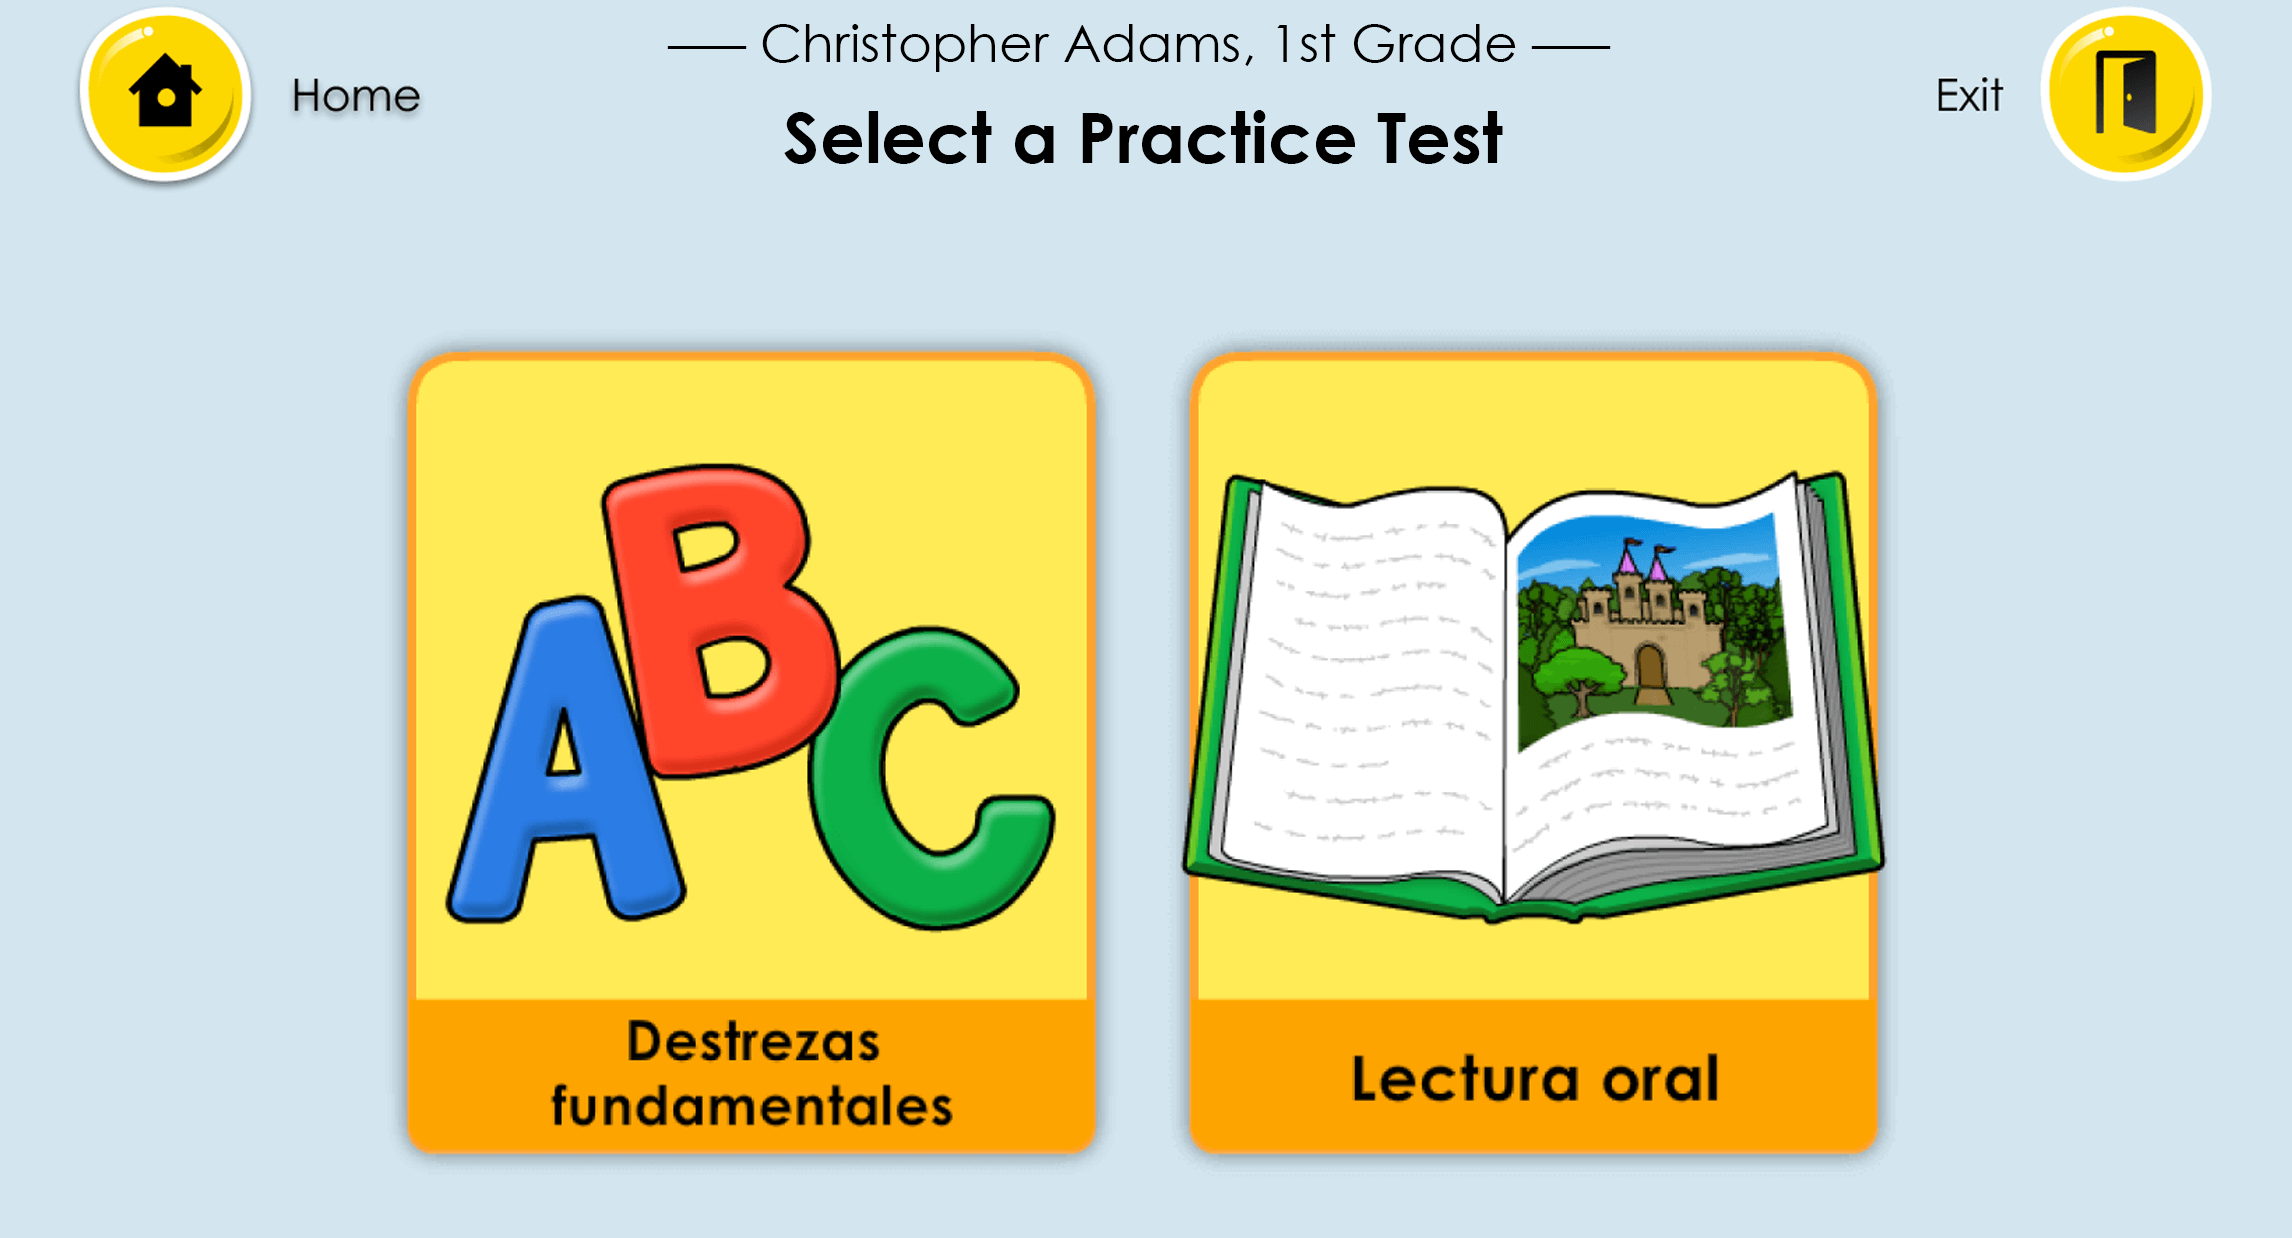 Students taking the Practice Test in Spanish will be given their options in Spanish.